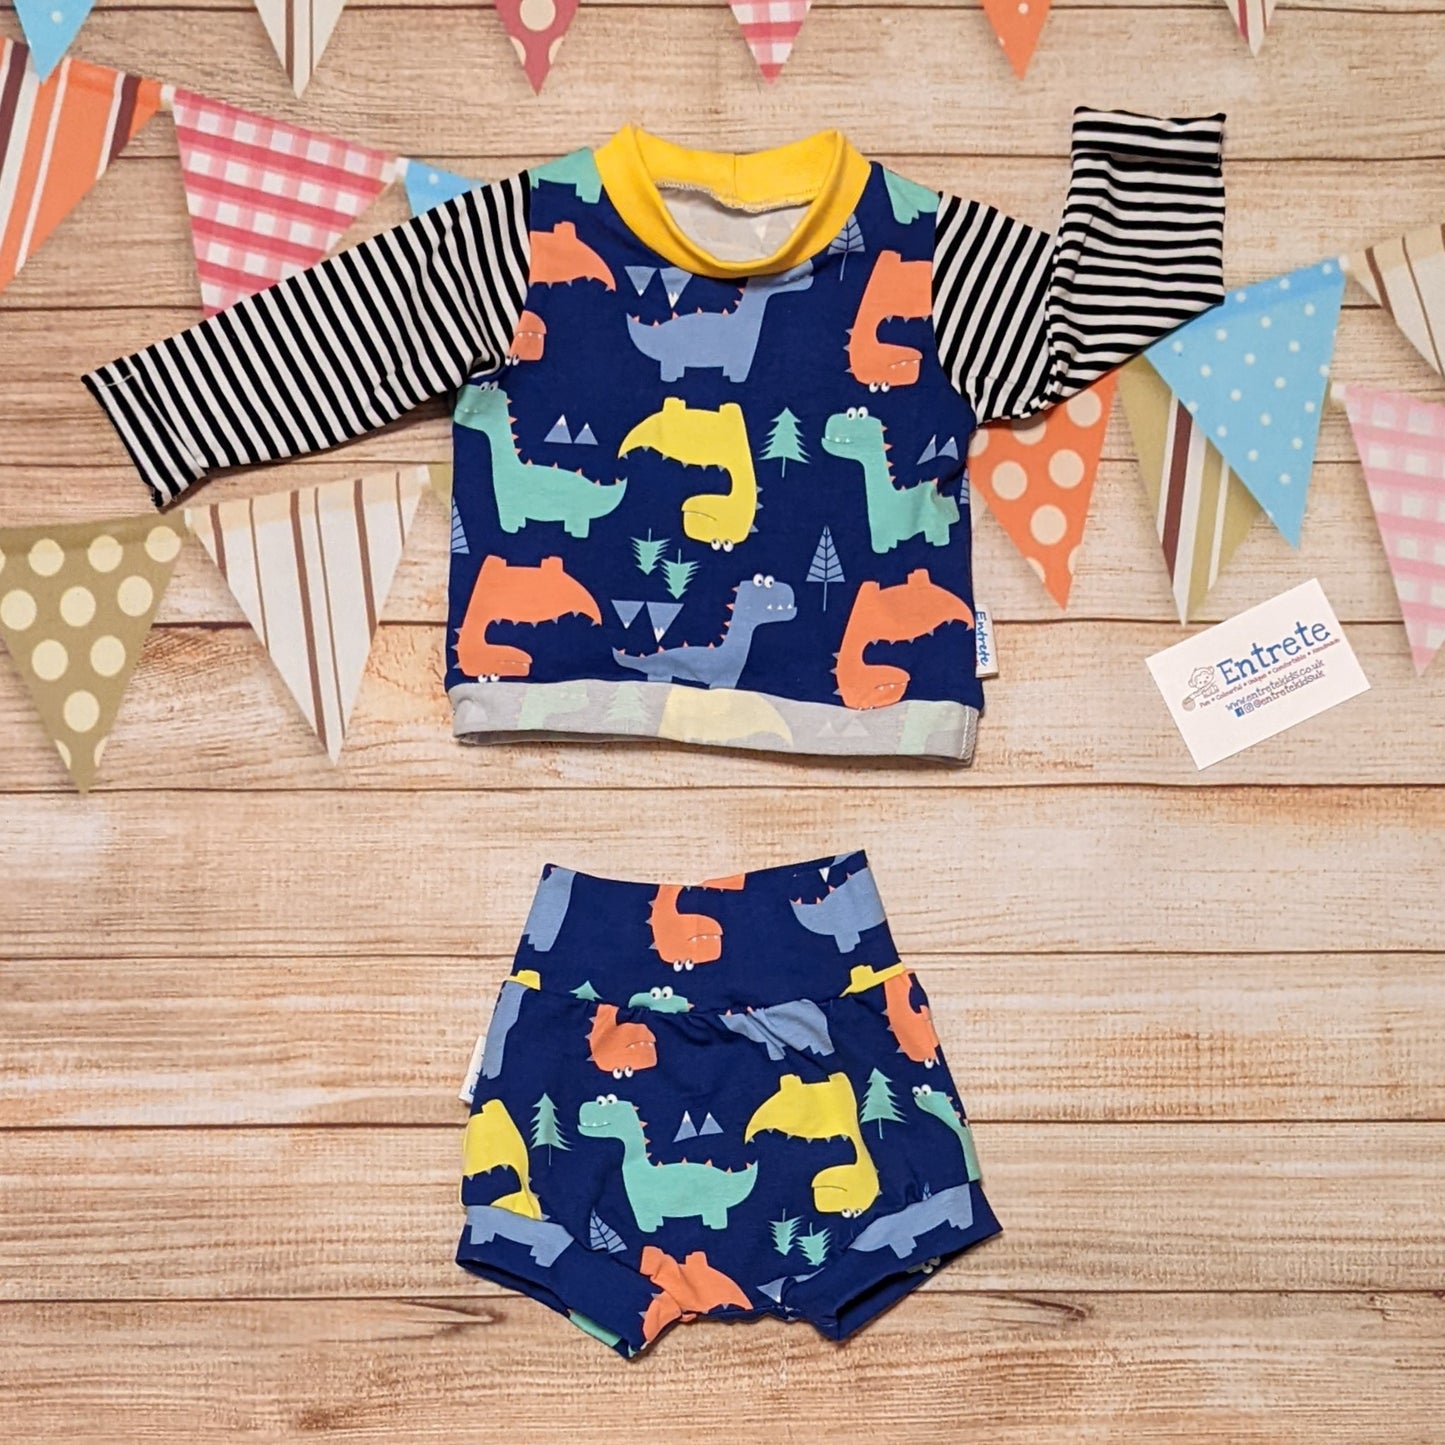 The soft, comfy and prehistorically fun blue dinosaur shorts. Shown as an outfit with a long sleeved t-shirt (sold separately)